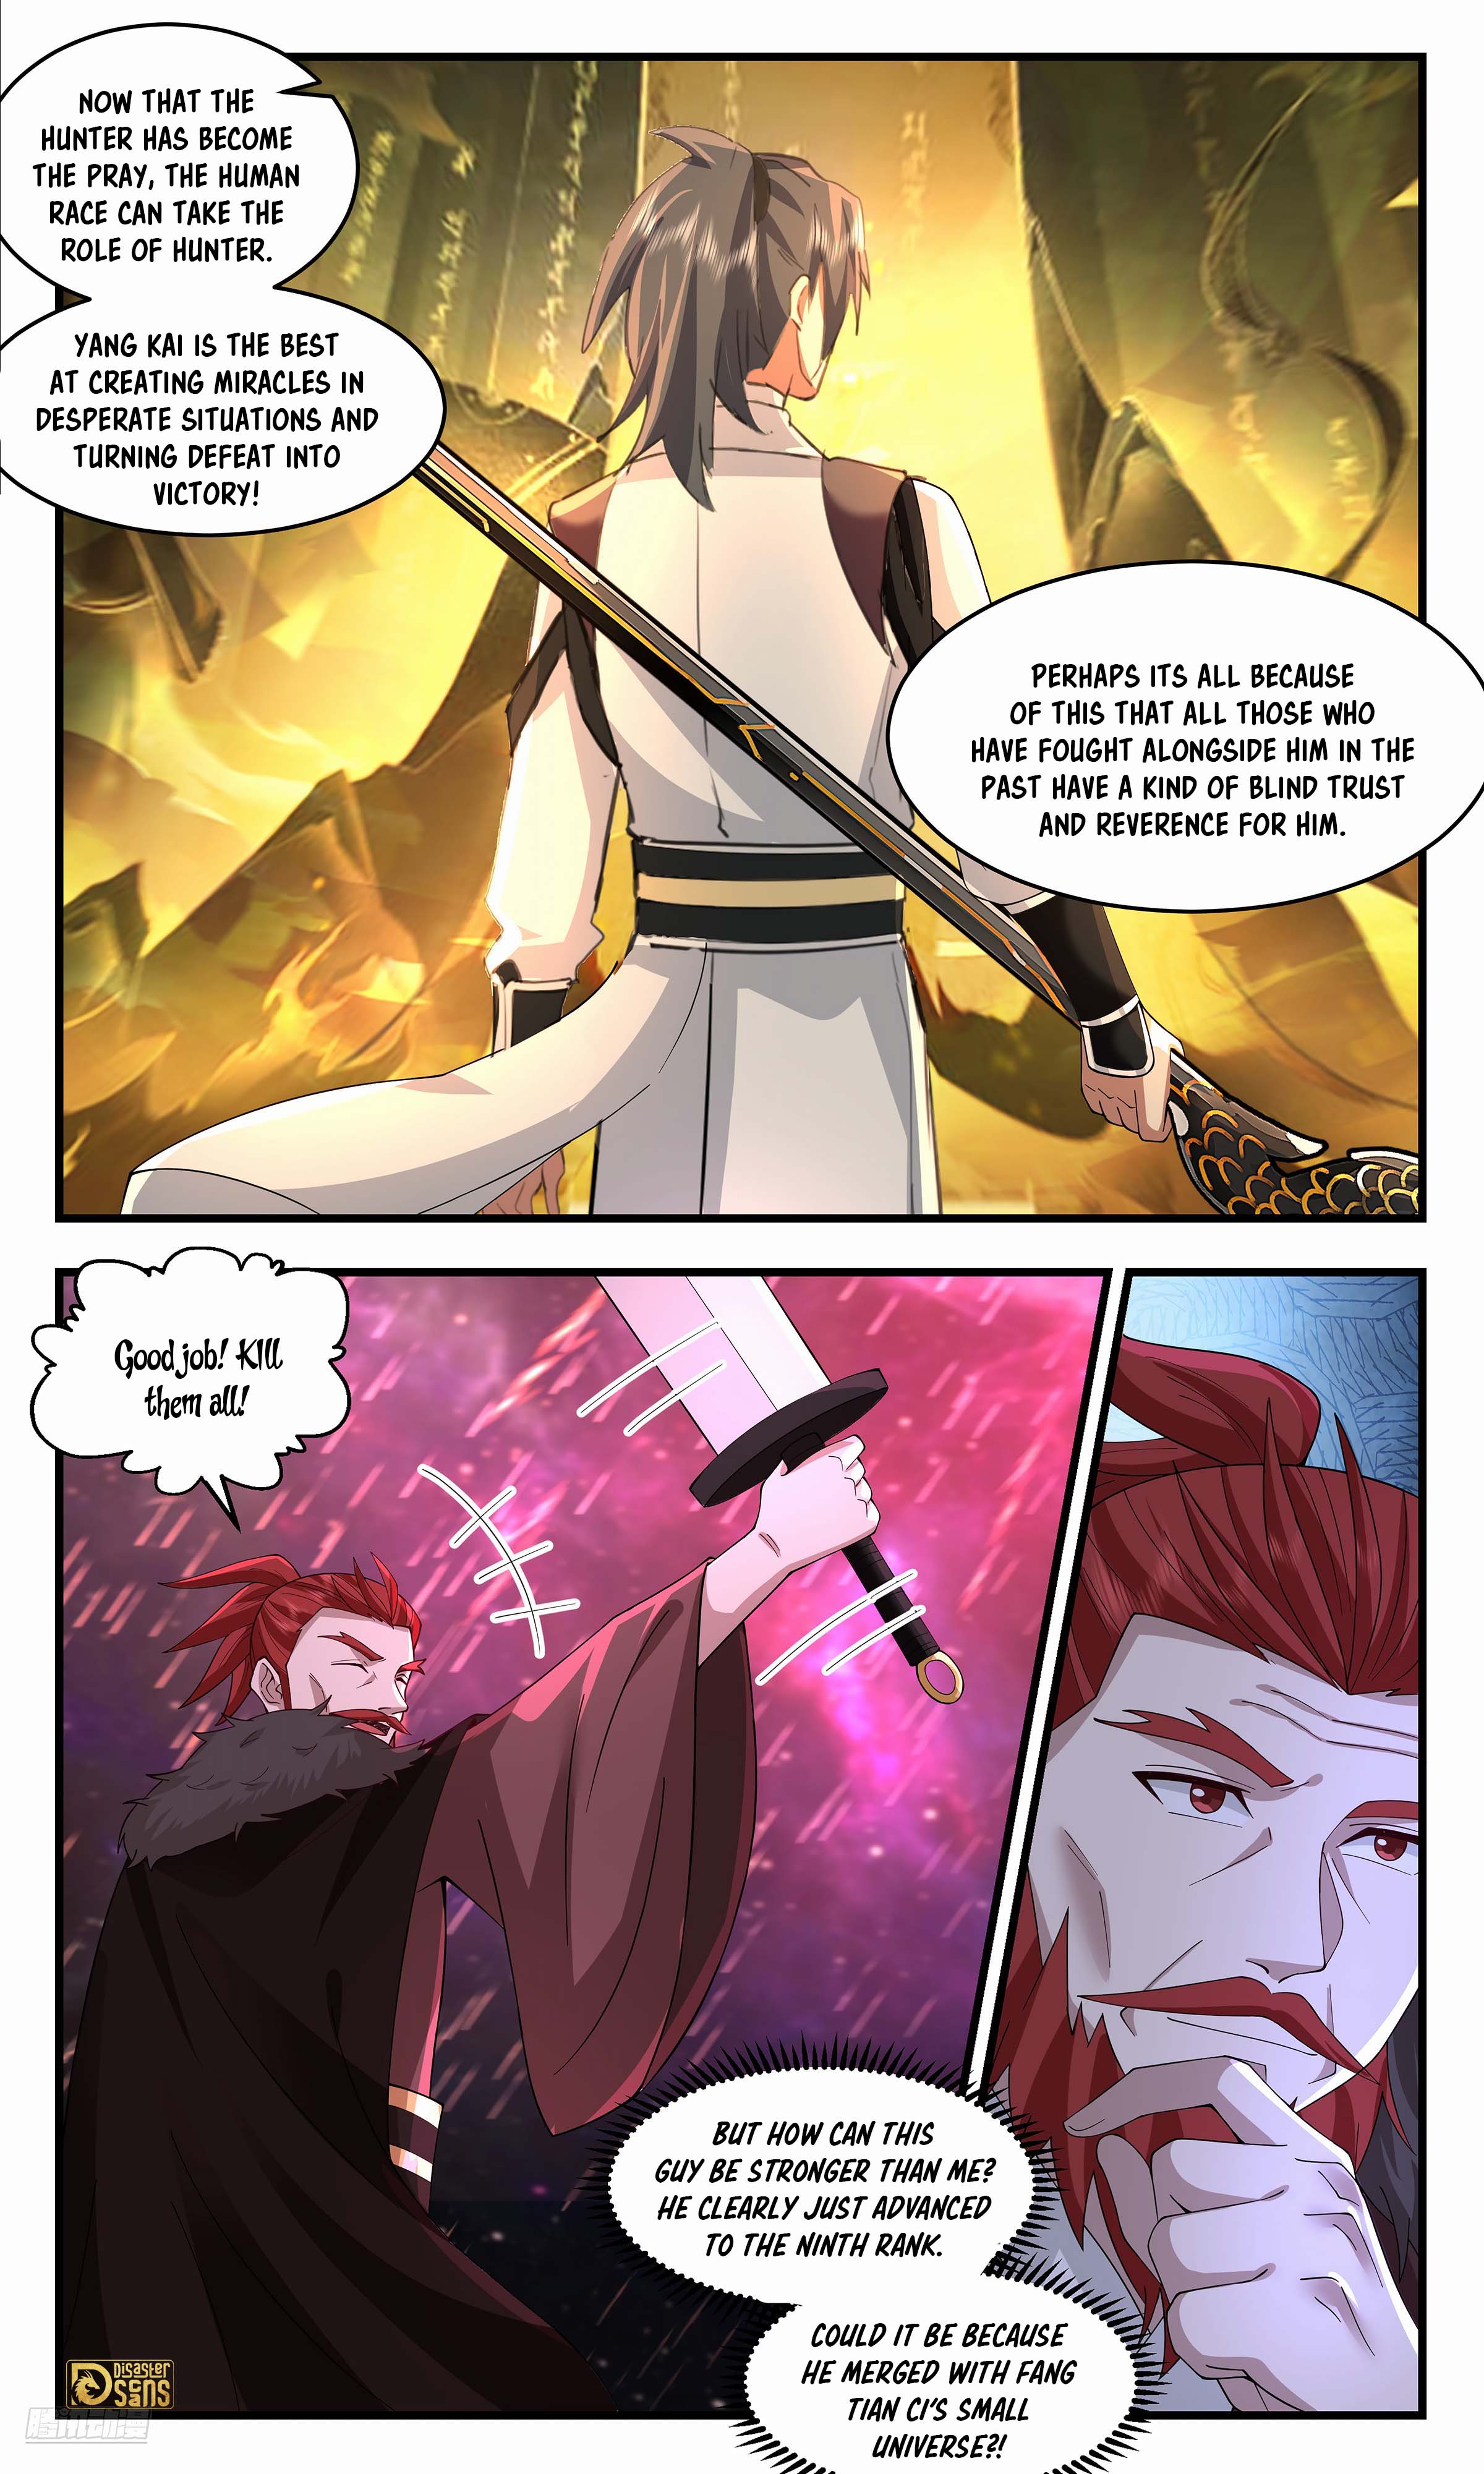 Martial Peak] Did this guy really become this guy? : r/Manhua